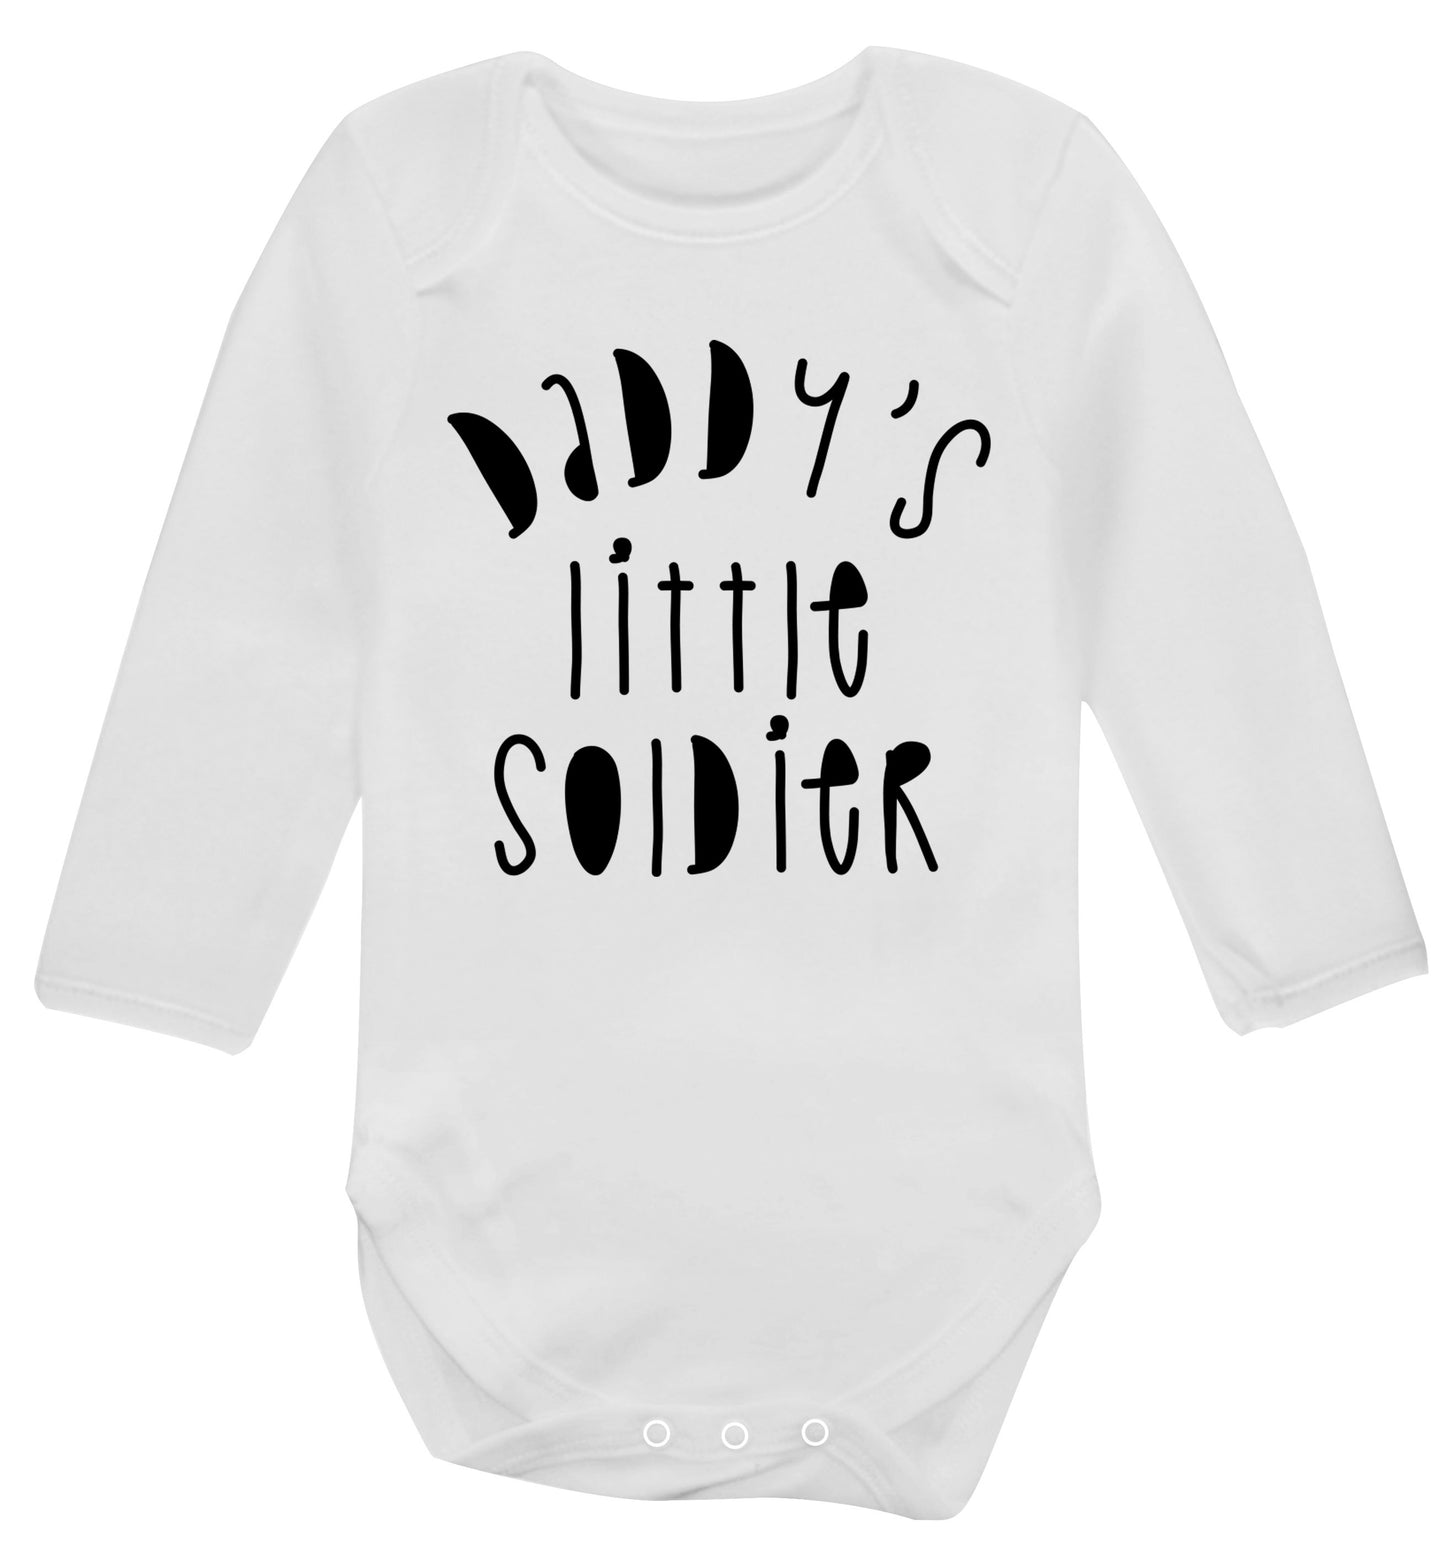 Daddy's little soldier Baby Vest long sleeved white 6-12 months